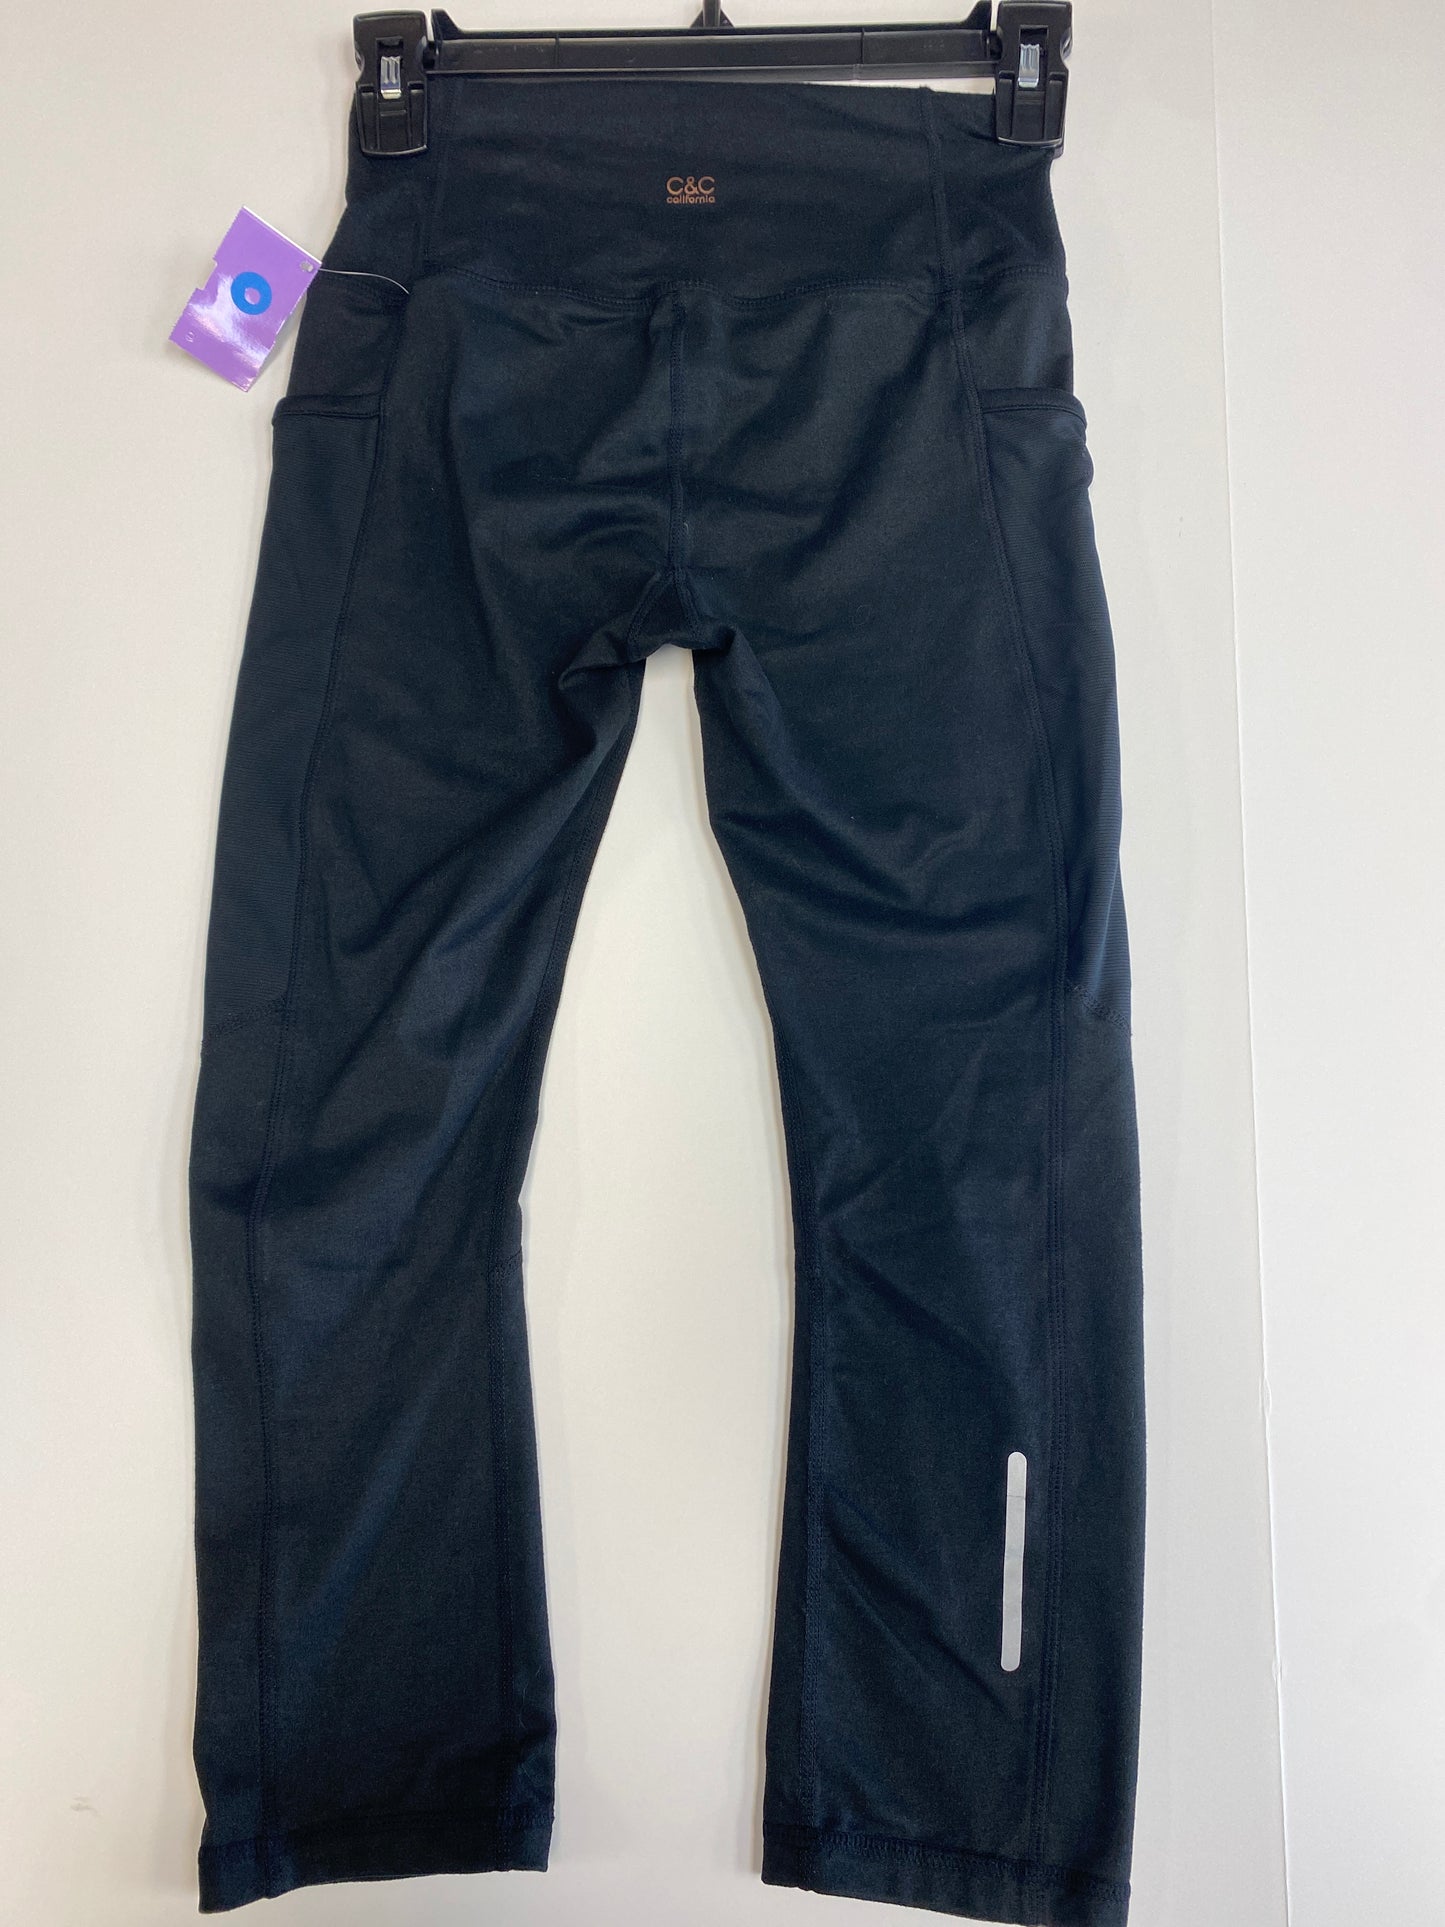 Athletic Capris By Athletic Works Size: Xxl